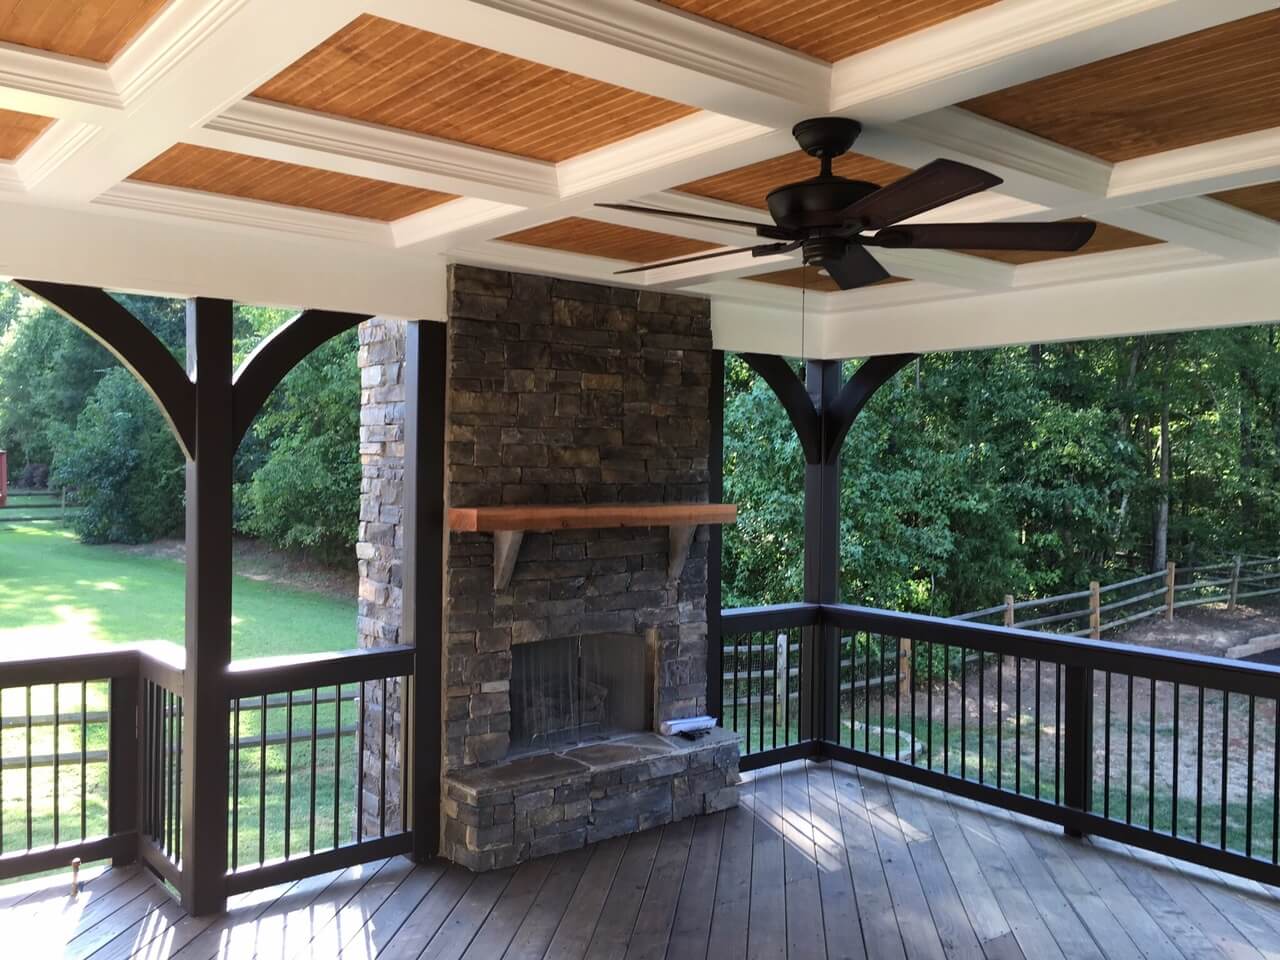 Covered porch with outdoor fireplace